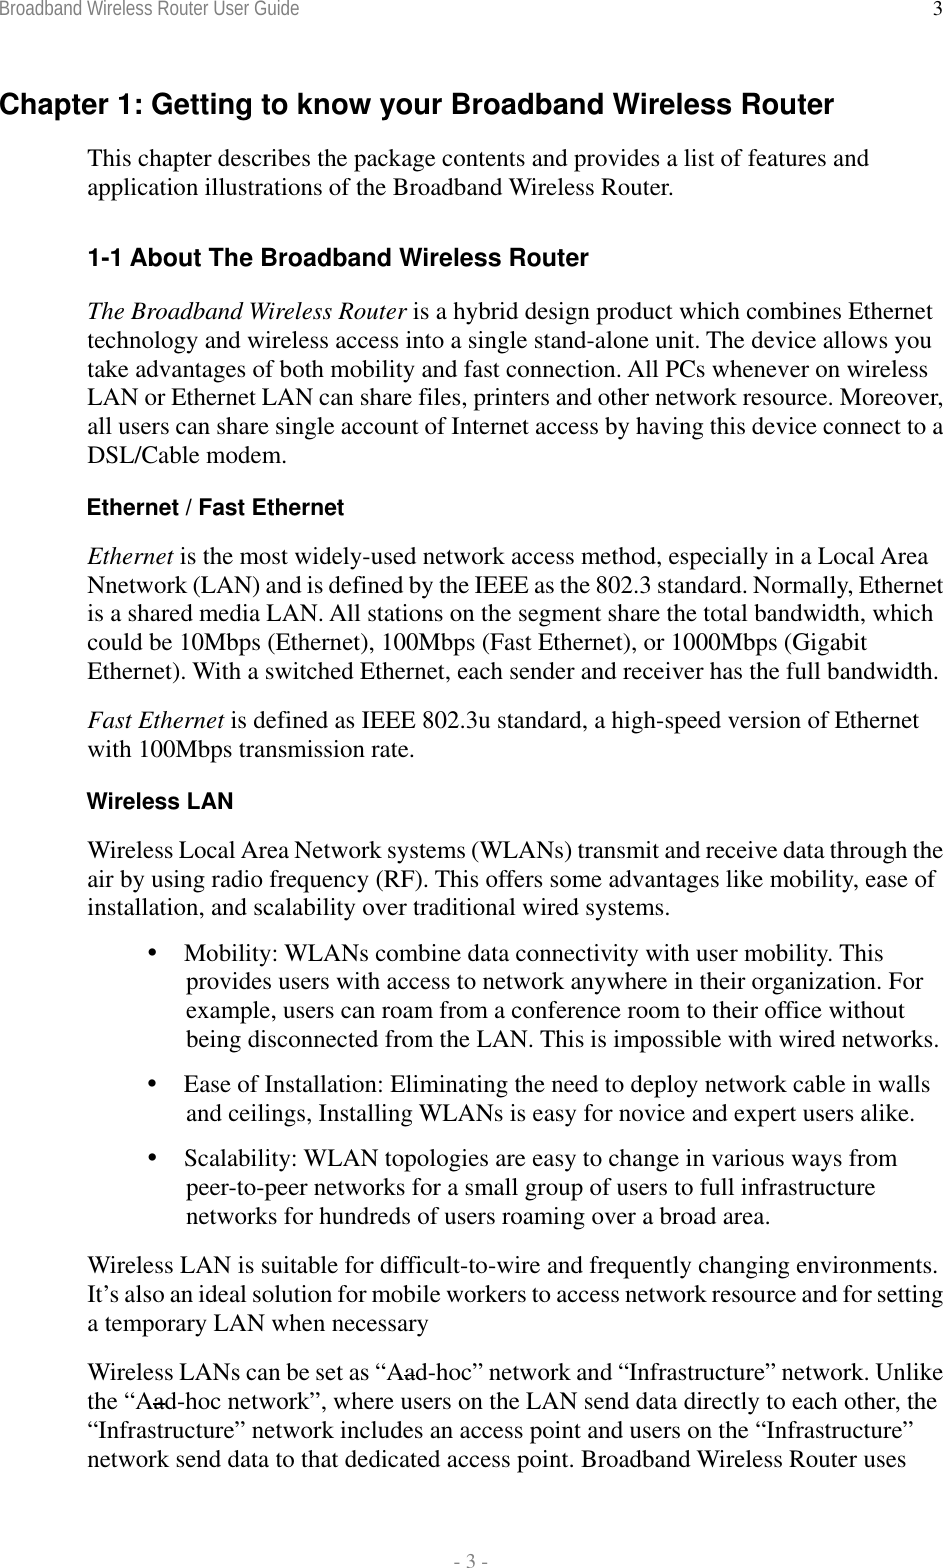 Broadband Wireless Router User Guide  - 3 - 3Chapter 1: Getting to know your Broadband Wireless Router This chapter describes the package contents and provides a list of features and application illustrations of the Broadband Wireless Router.  1-1 About The Broadband Wireless Router The Broadband Wireless Router is a hybrid design product which combines Ethernet technology and wireless access into a single stand-alone unit. The device allows you take advantages of both mobility and fast connection. All PCs whenever on wireless LAN or Ethernet LAN can share files, printers and other network resource. Moreover, all users can share single account of Internet access by having this device connect to a DSL/Cable modem. Ethernet / Fast Ethernet Ethernet is the most widely-used network access method, especially in a Local Area Nnetwork (LAN) and is defined by the IEEE as the 802.3 standard. Normally, Ethernet is a shared media LAN. All stations on the segment share the total bandwidth, which could be 10Mbps (Ethernet), 100Mbps (Fast Ethernet), or 1000Mbps (Gigabit Ethernet). With a switched Ethernet, each sender and receiver has the full bandwidth. Fast Ethernet is defined as IEEE 802.3u standard, a high-speed version of Ethernet with 100Mbps transmission rate. Wireless LAN Wireless Local Area Network systems (WLANs) transmit and receive data through the air by using radio frequency (RF). This offers some advantages like mobility, ease of installation, and scalability over traditional wired systems.  Mobility: WLANs combine data connectivity with user mobility. This provides users with access to network anywhere in their organization. For example, users can roam from a conference room to their office without being disconnected from the LAN. This is impossible with wired networks.  Ease of Installation: Eliminating the need to deploy network cable in walls and ceilings, Installing WLANs is easy for novice and expert users alike.  Scalability: WLAN topologies are easy to change in various ways from peer-to-peer networks for a small group of users to full infrastructure networks for hundreds of users roaming over a broad area. Wireless LAN is suitable for difficult-to-wire and frequently changing environments. It’s also an ideal solution for mobile workers to access network resource and for setting a temporary LAN when necessary Wireless LANs can be set as “Aad-hoc” network and “Infrastructure” network. Unlike the “Aad-hoc network”, where users on the LAN send data directly to each other, the “Infrastructure” network includes an access point and users on the “Infrastructure” network send data to that dedicated access point. Broadband Wireless Router uses 